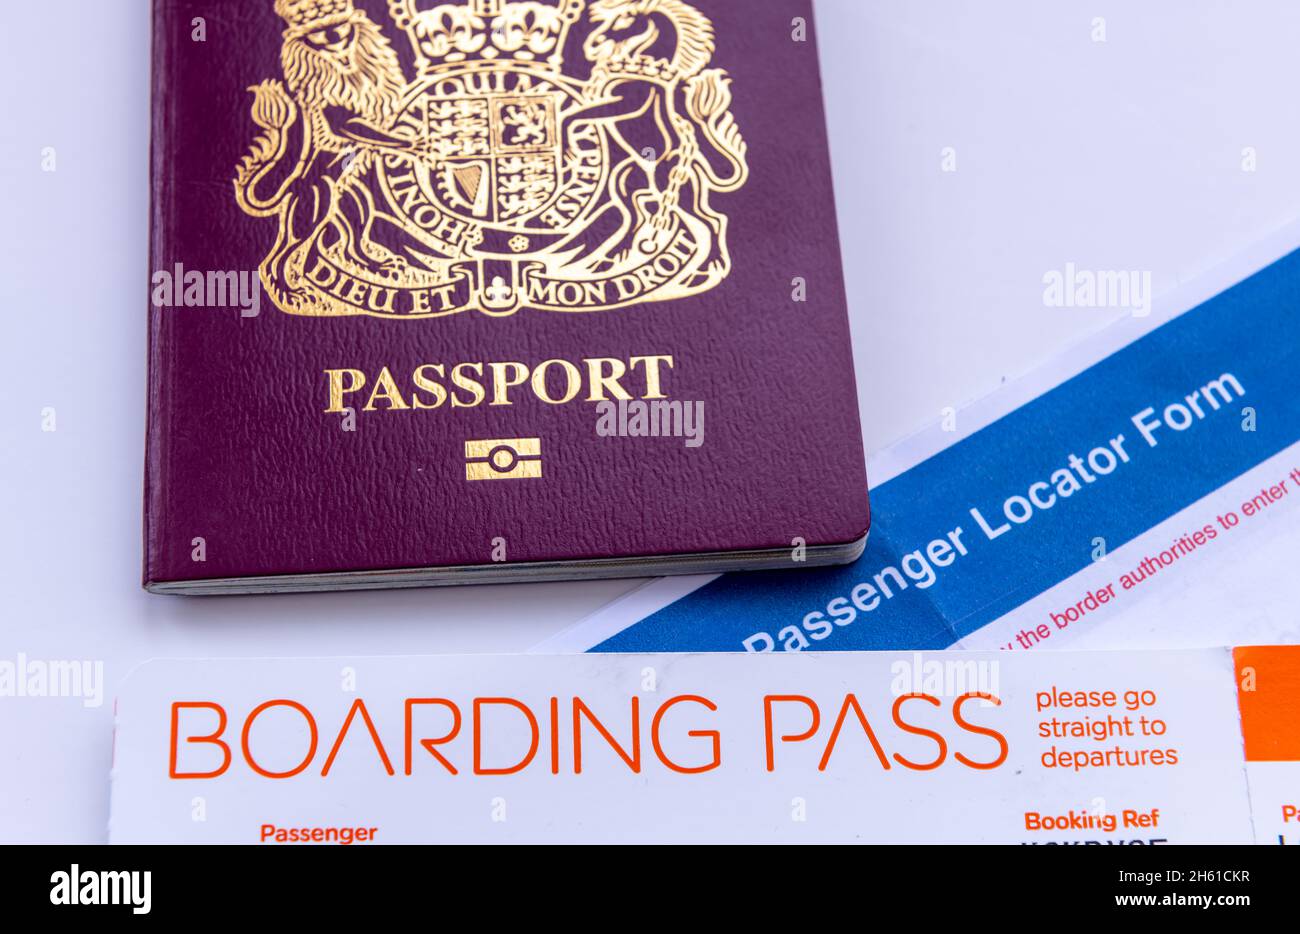 Passport, boarding pass, passenger locator form and Covid pass, the full set of documents required for international travel during Covid-19 pandemic. Stock Photo